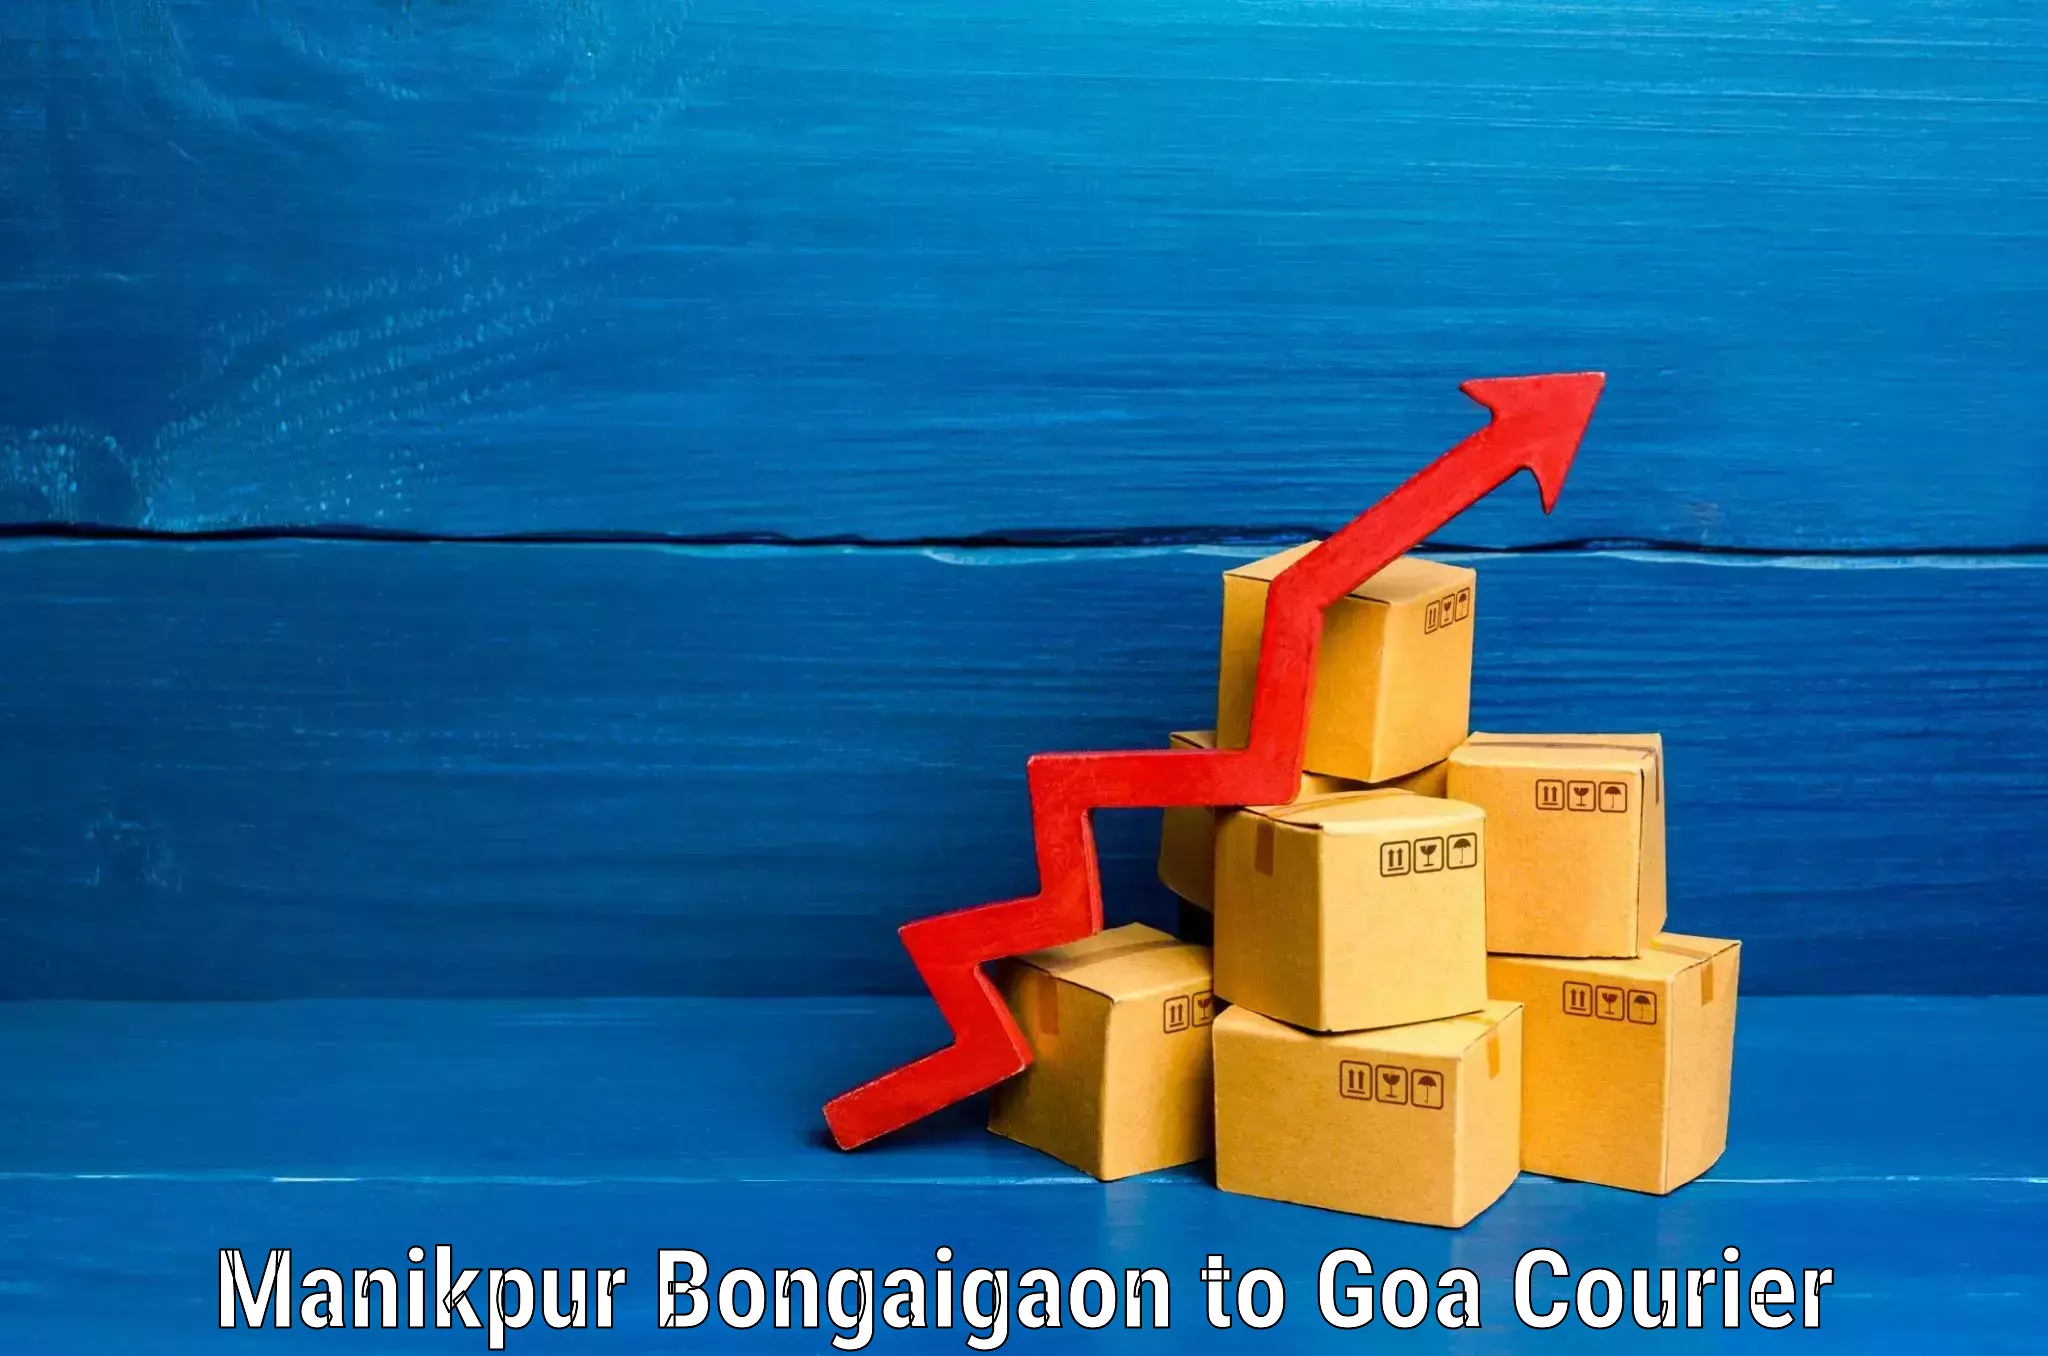 Luggage delivery system Manikpur Bongaigaon to South Goa